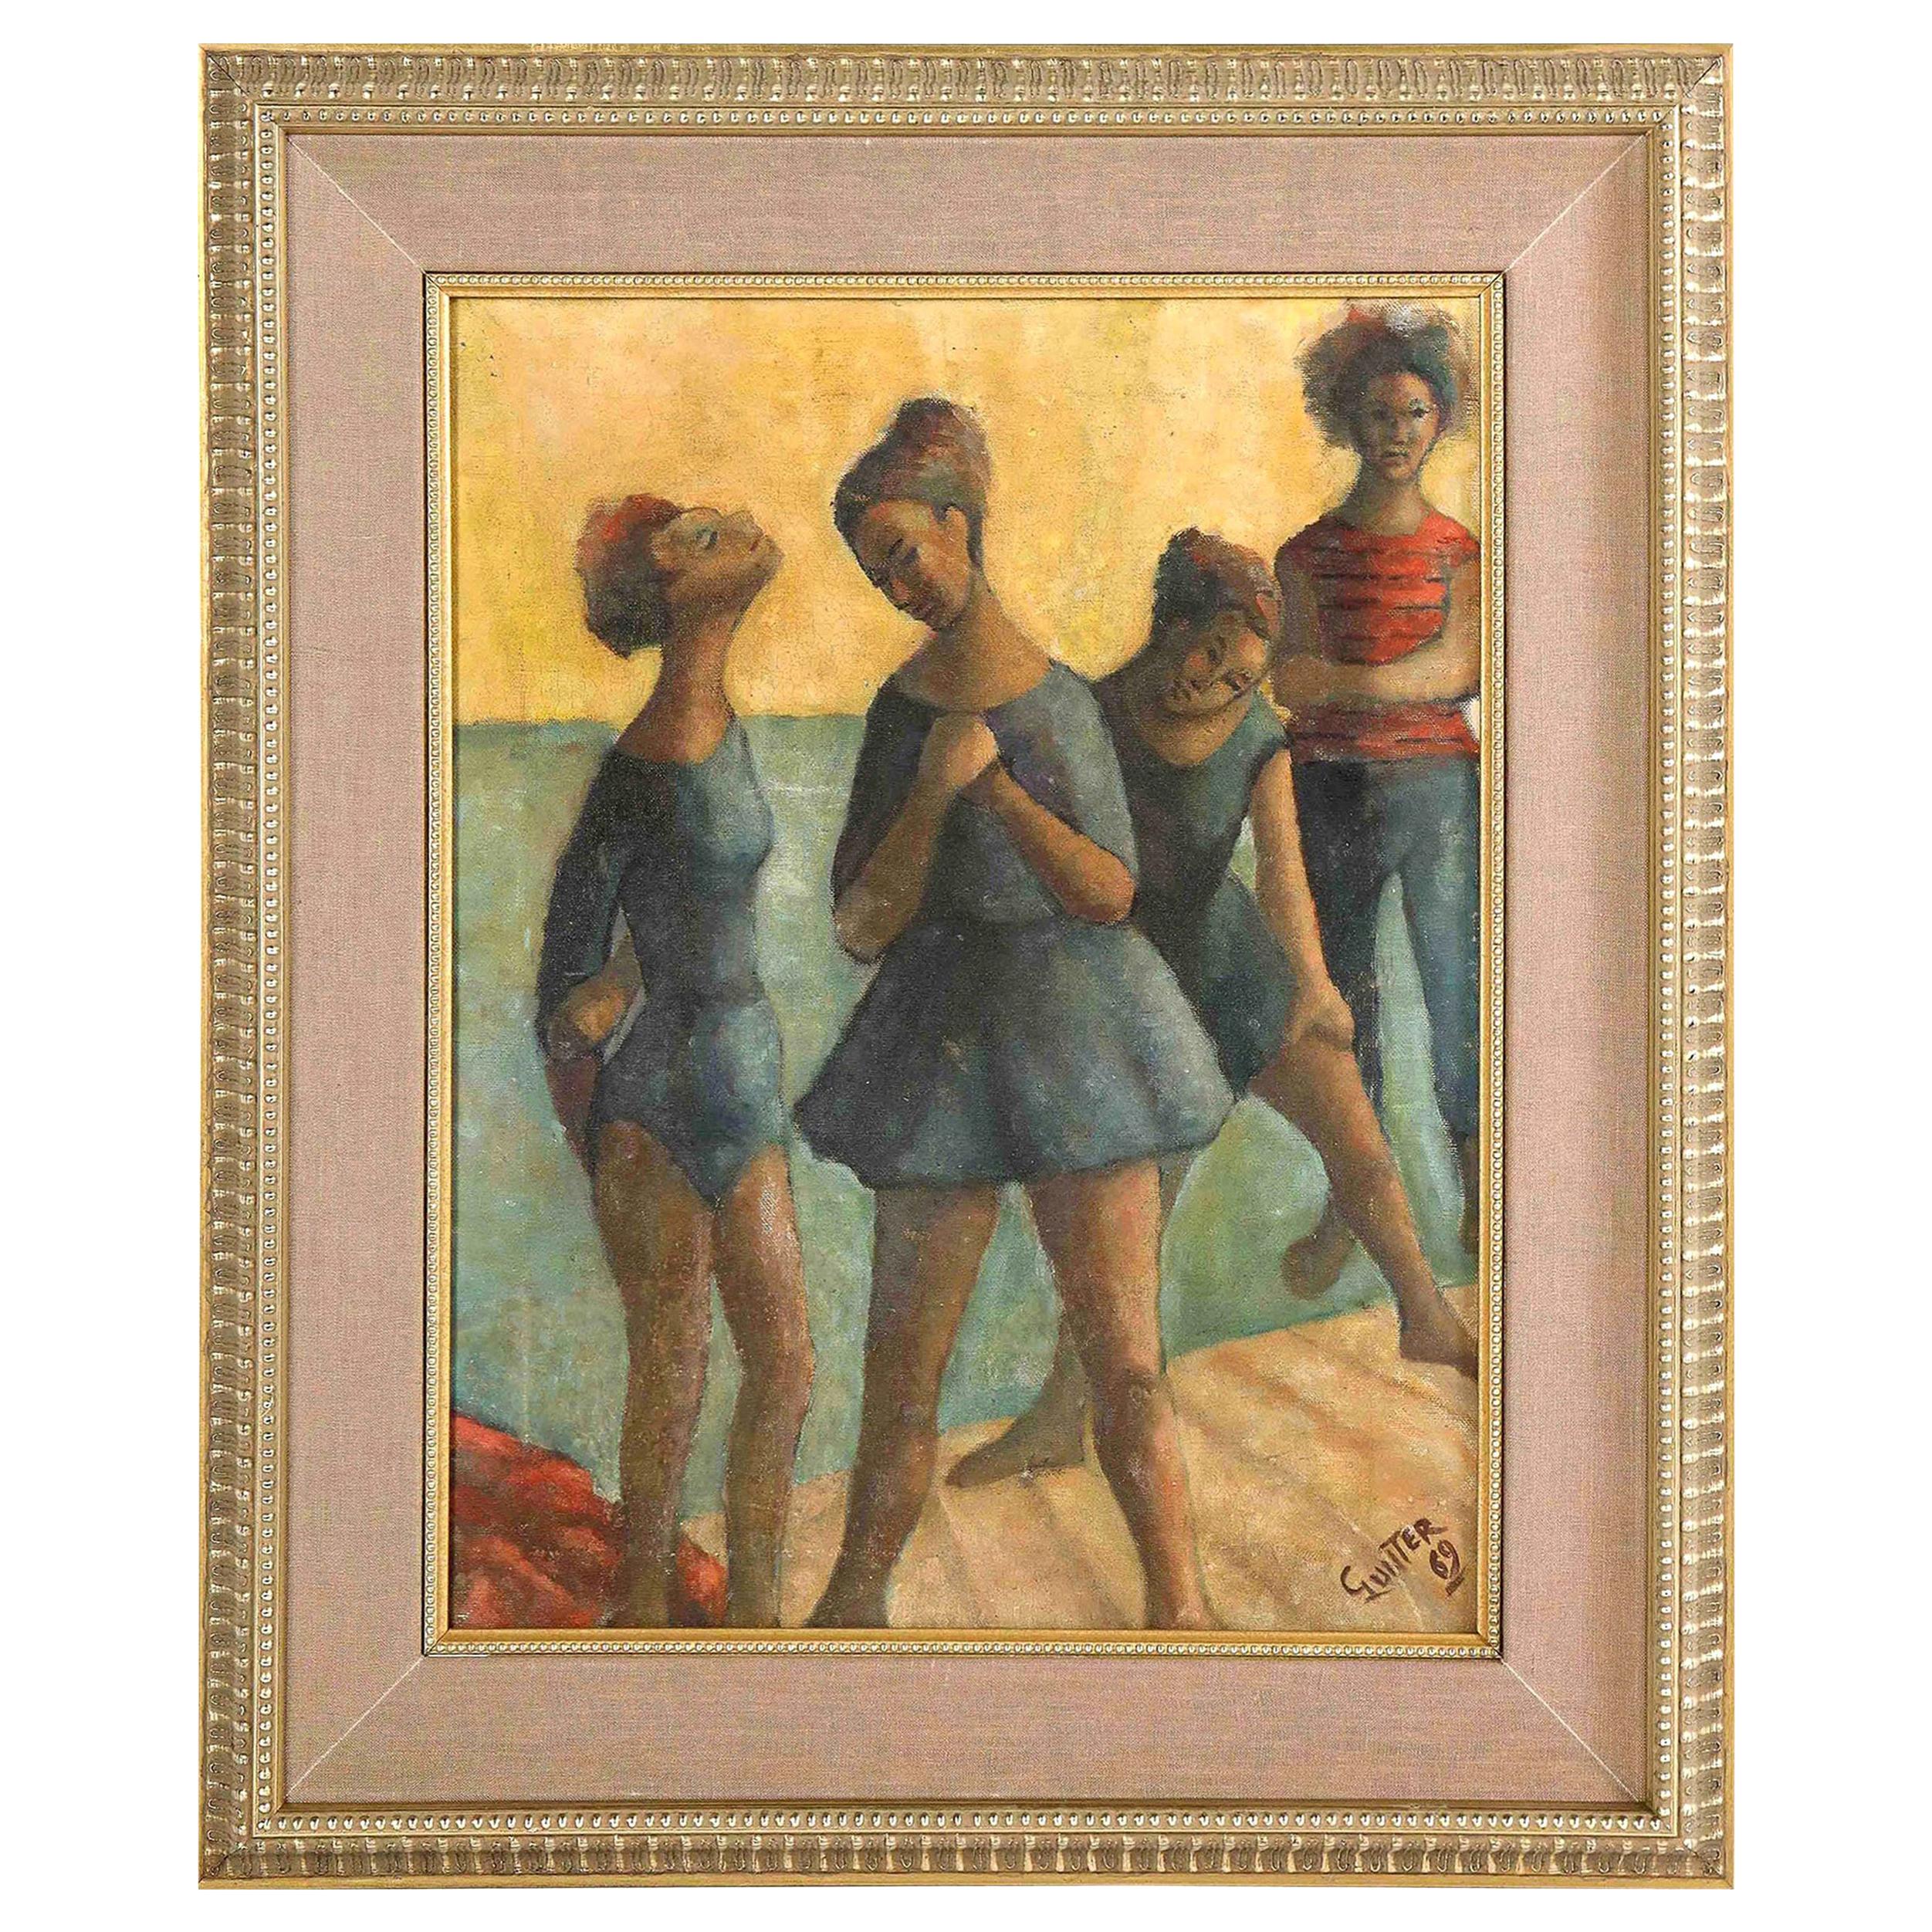 Painting, Signed Gunter, Green and Blue Color, "Dancers", Midcentury, C 1969